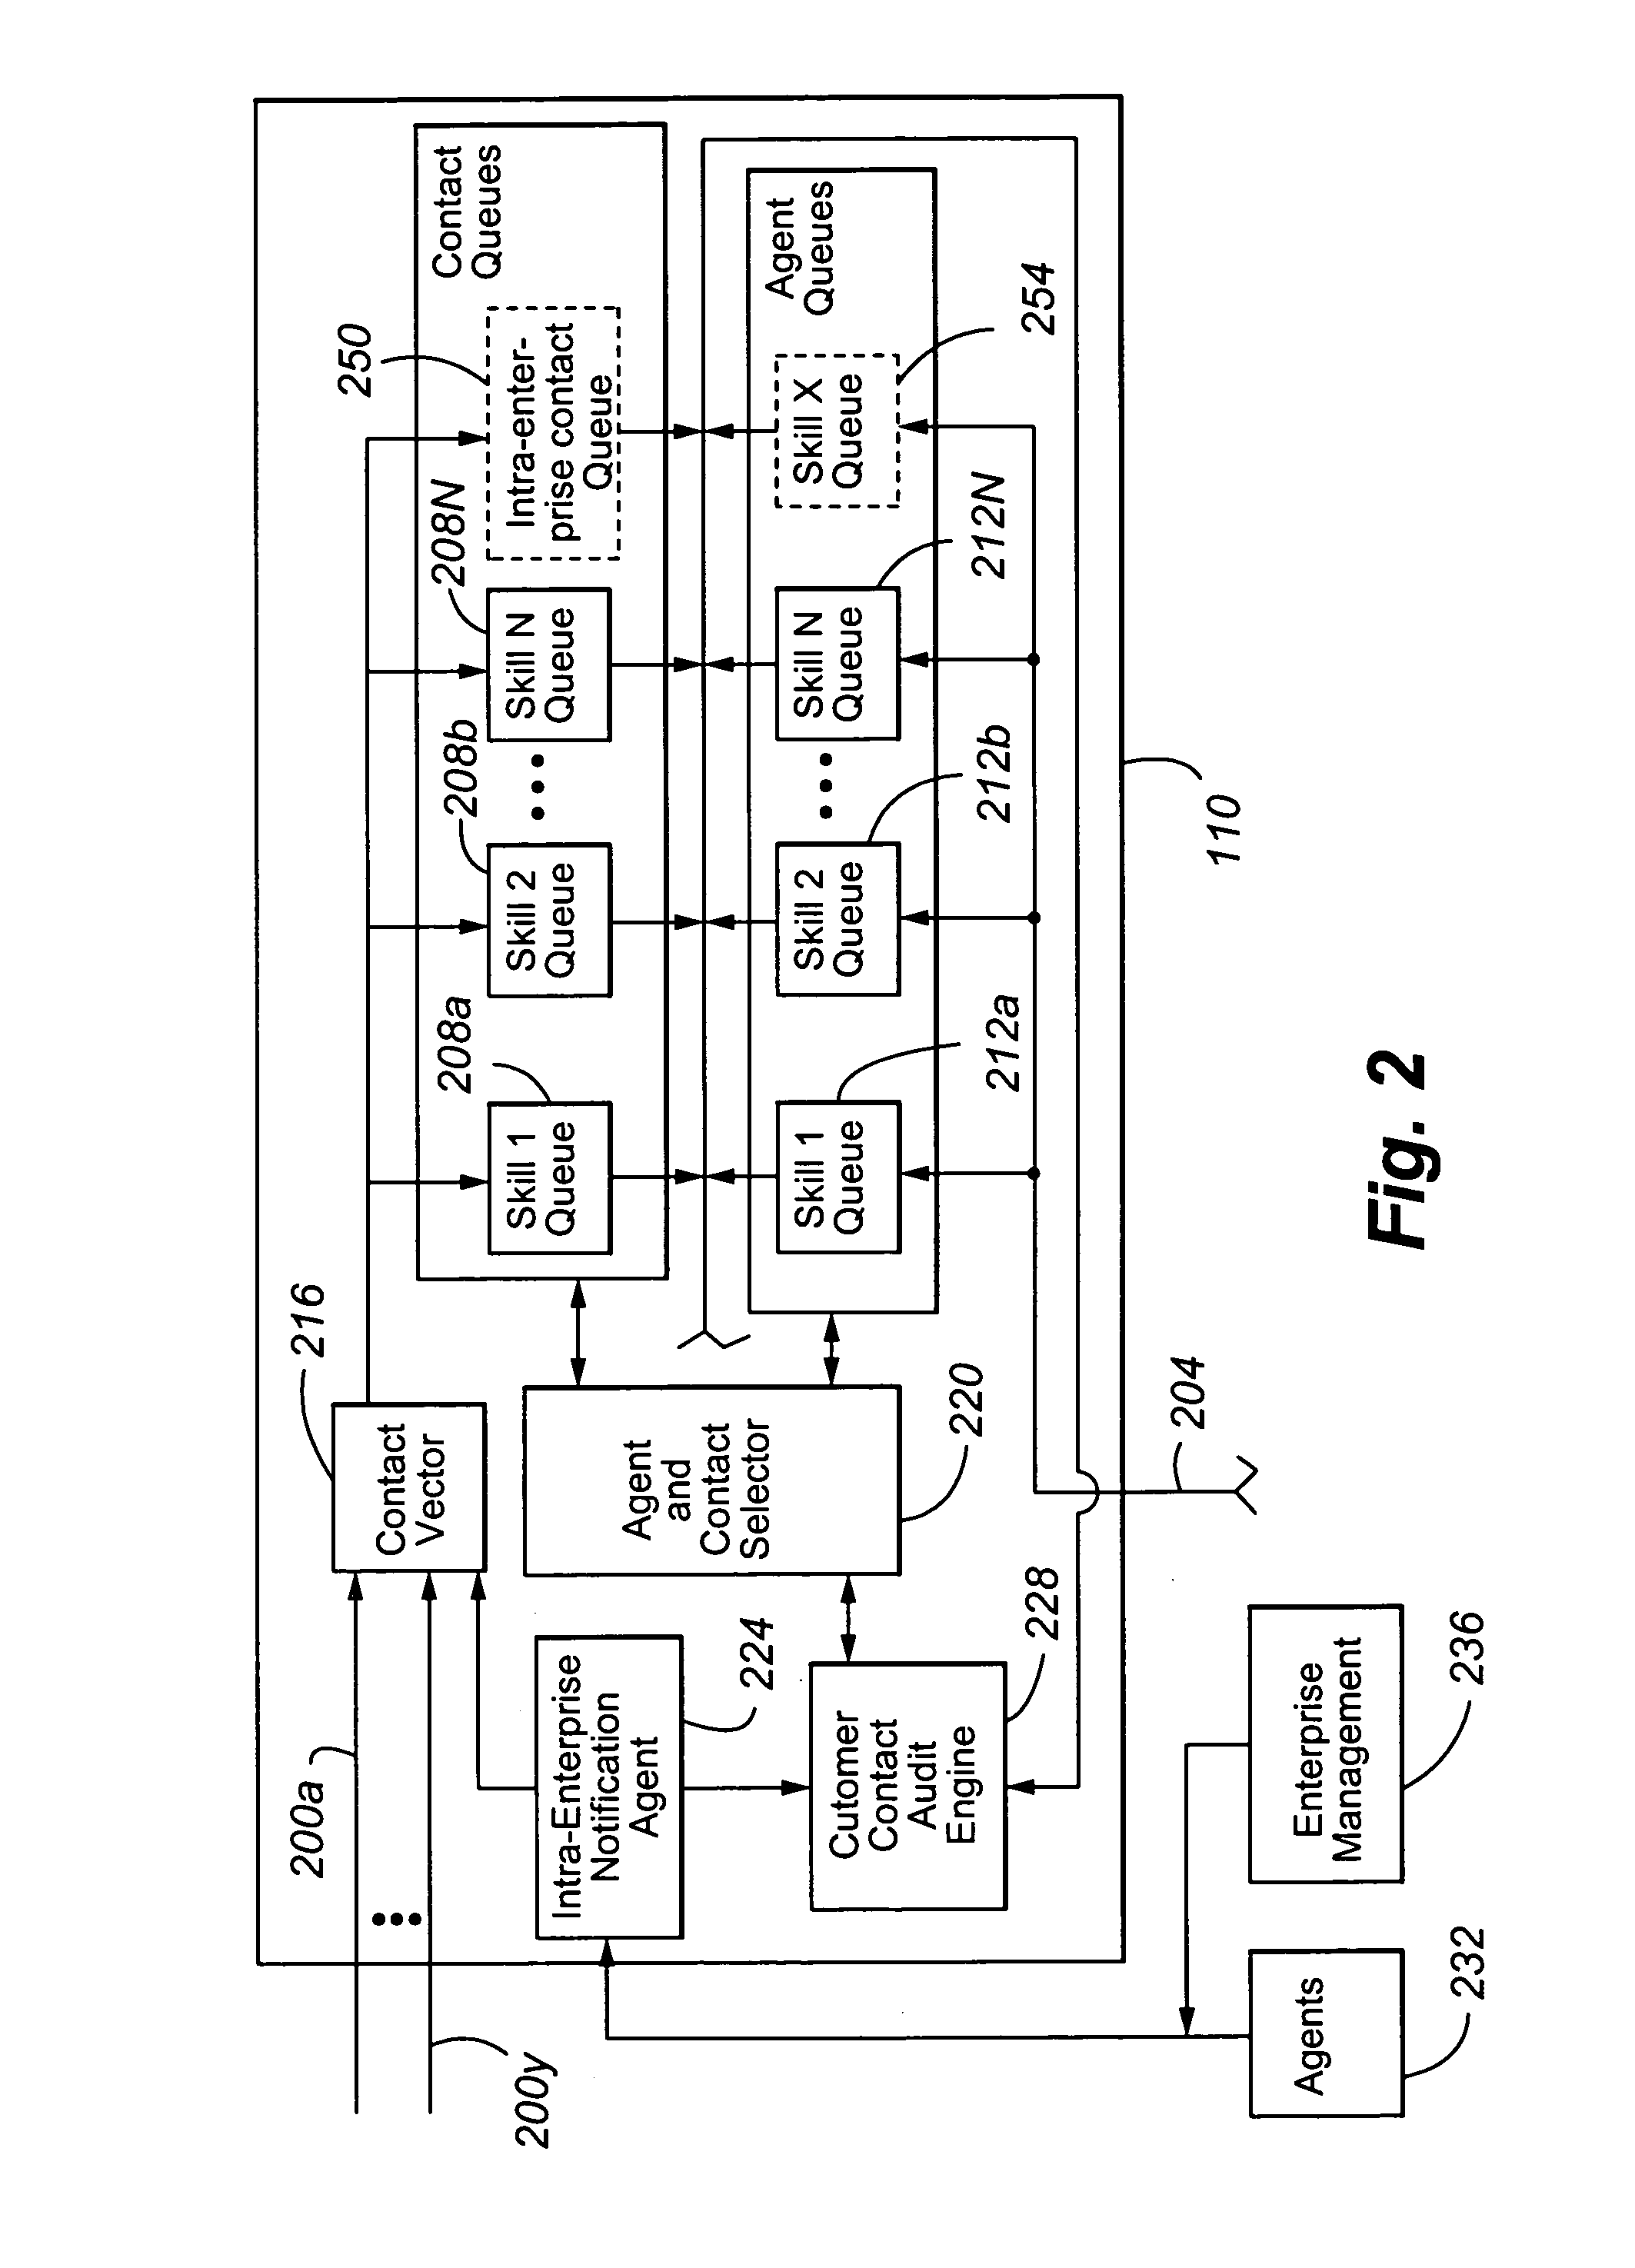 Method and apparatus for the automated delivery of notifications to contacts based on predicted work prioritization